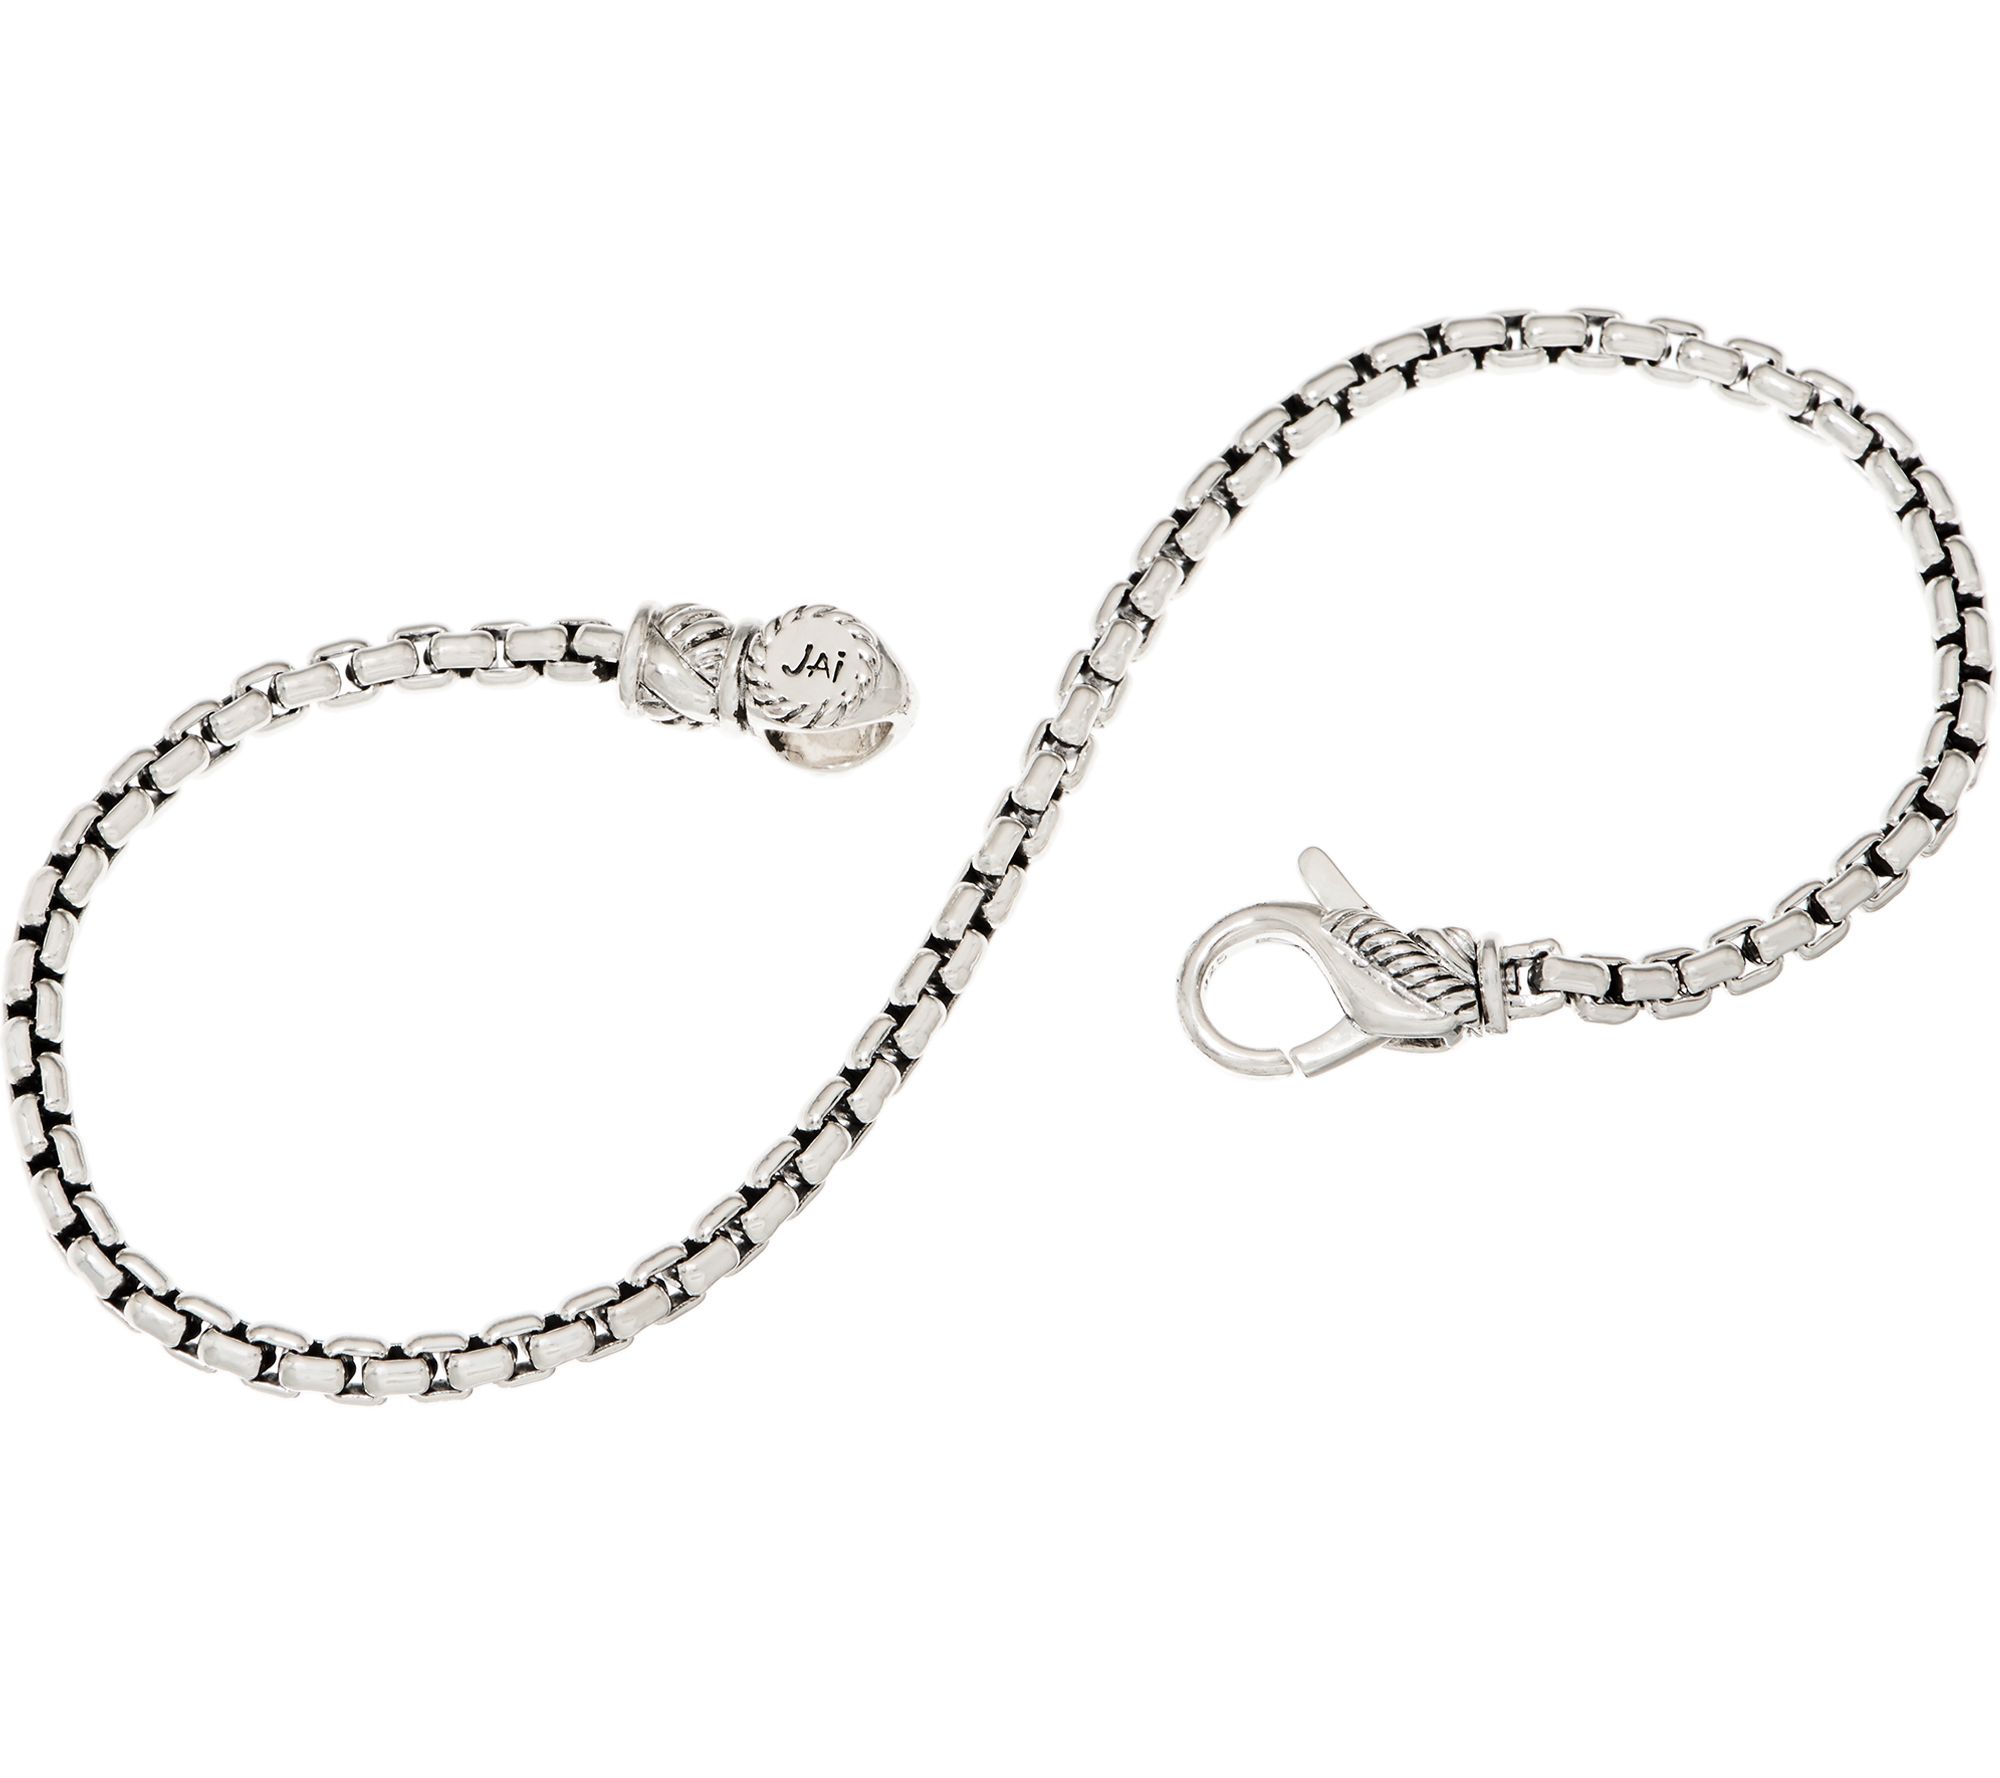 6 Smart Tips to Choose a Sterling Silver Chain For Your Pendant